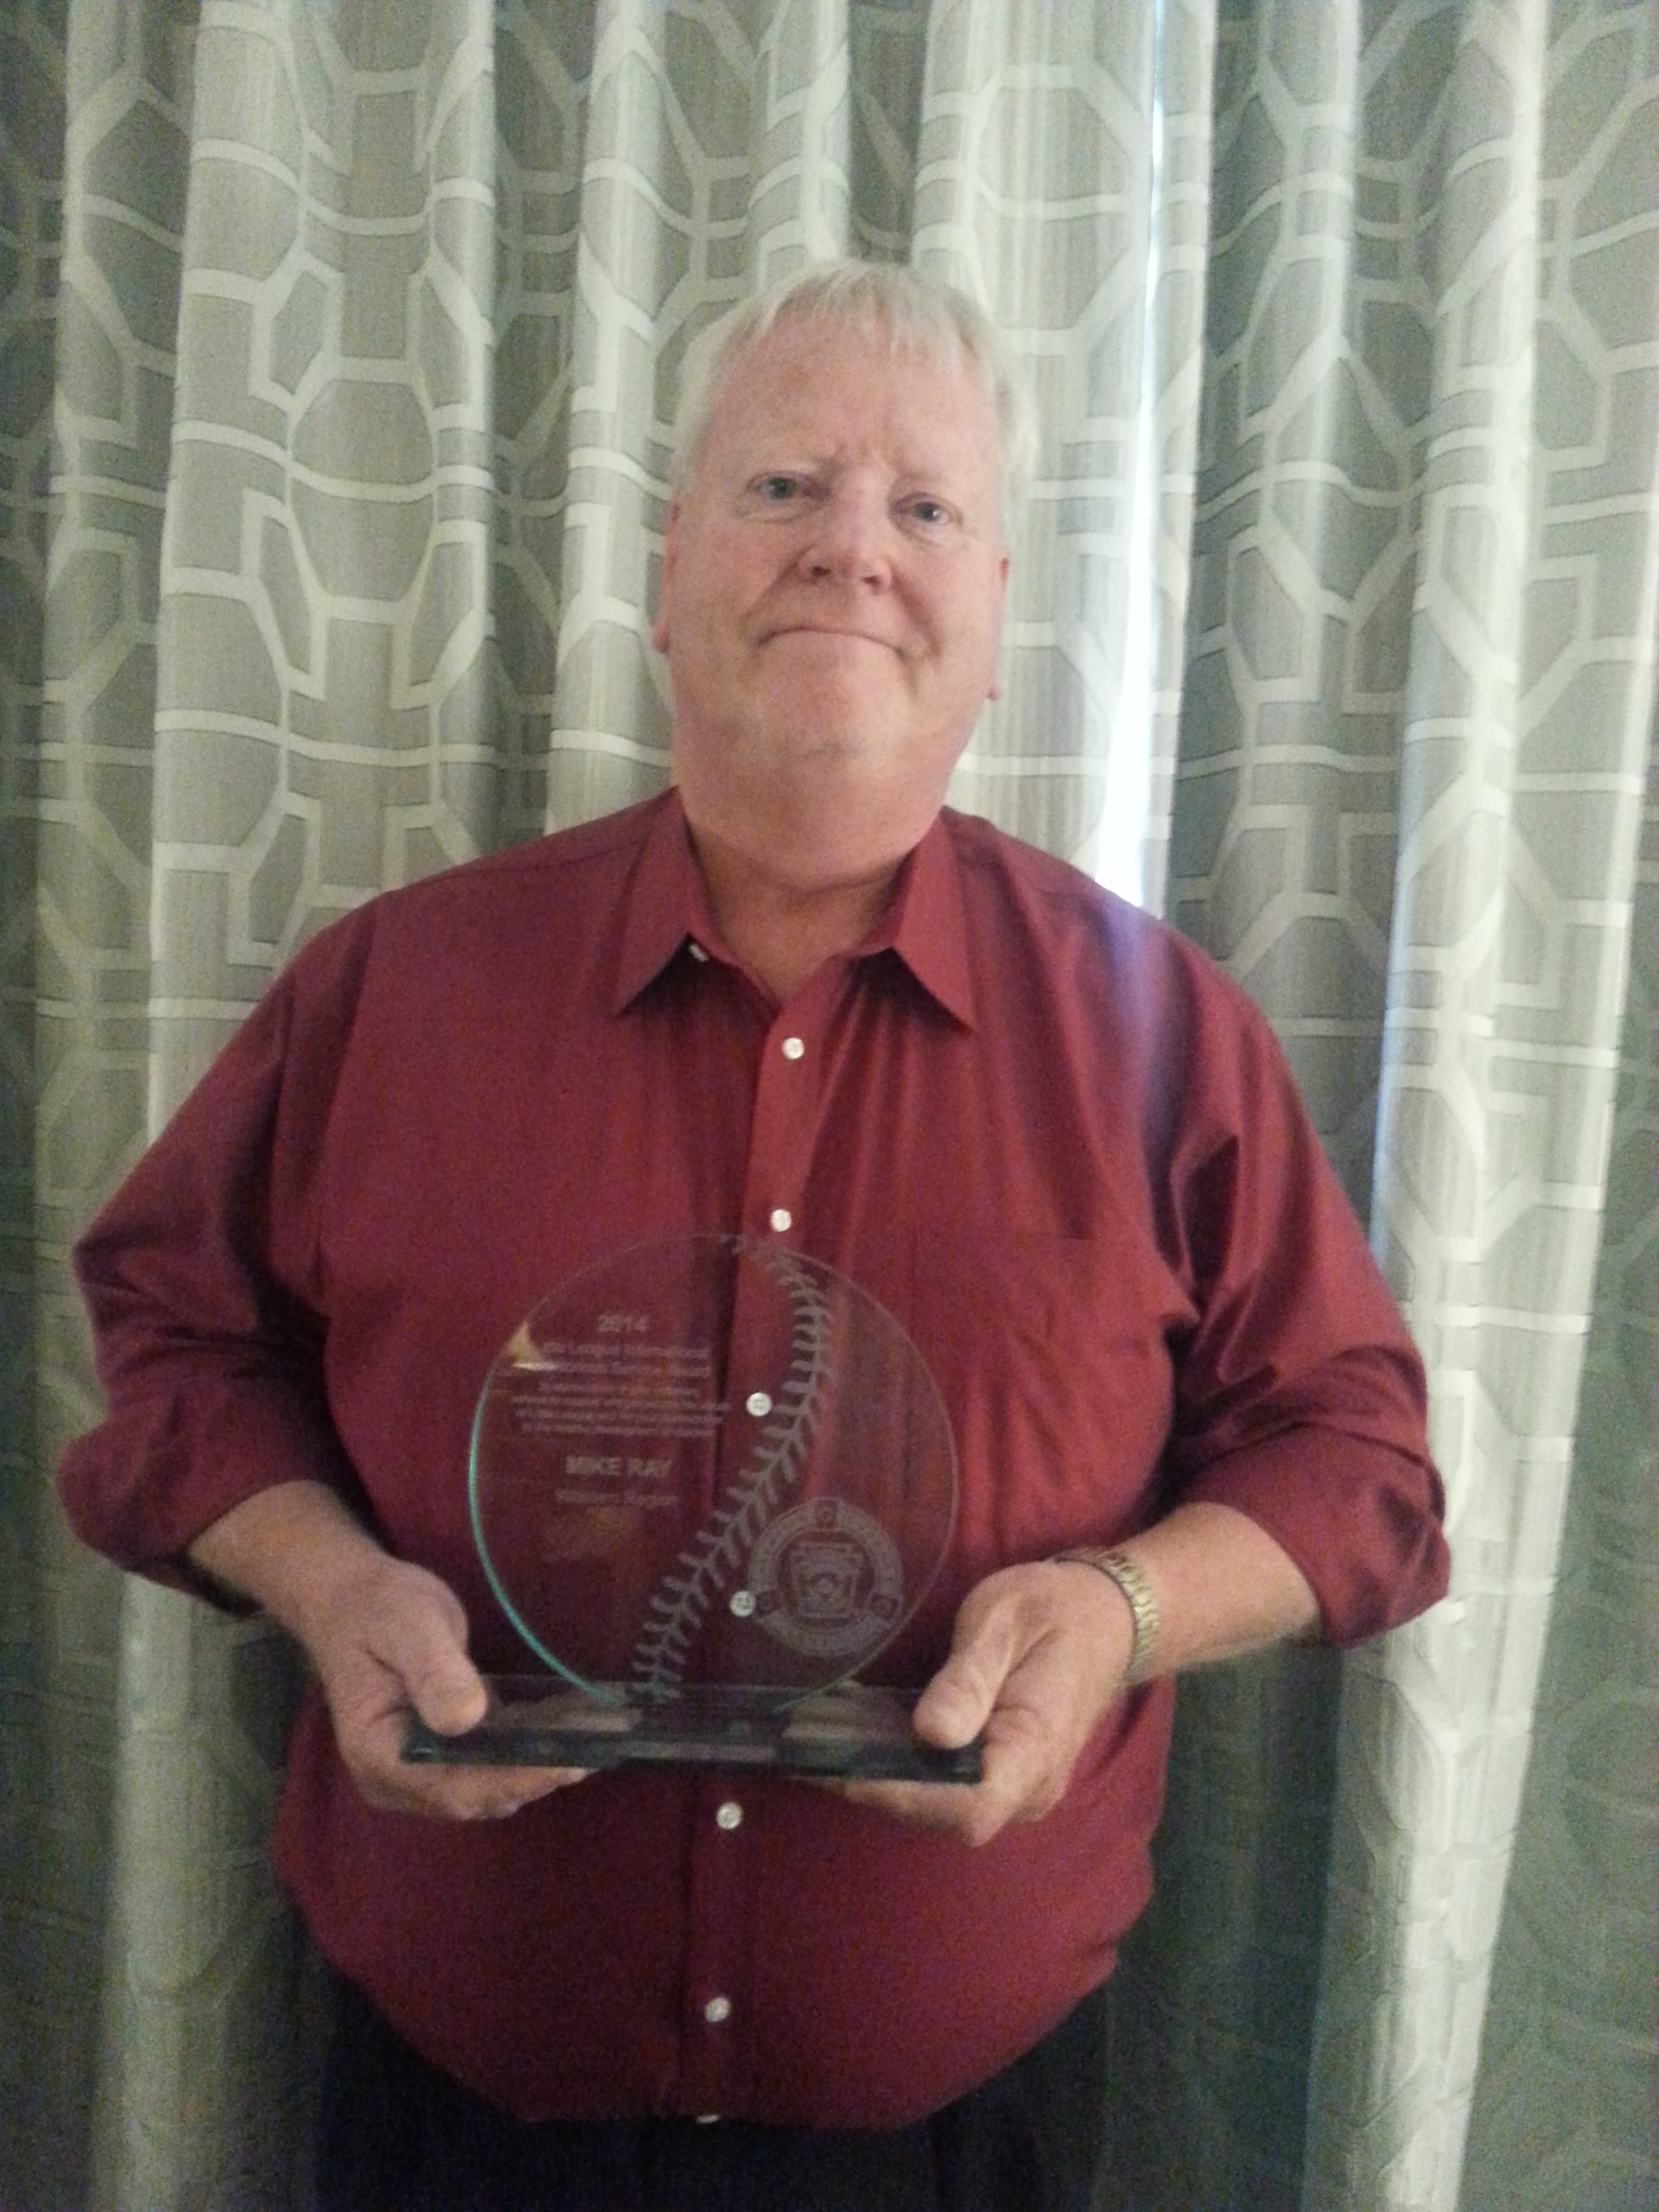 Vancouver's Mike Ray, recipient of the 2014 District Administrator Little League Meritorious Service Award.